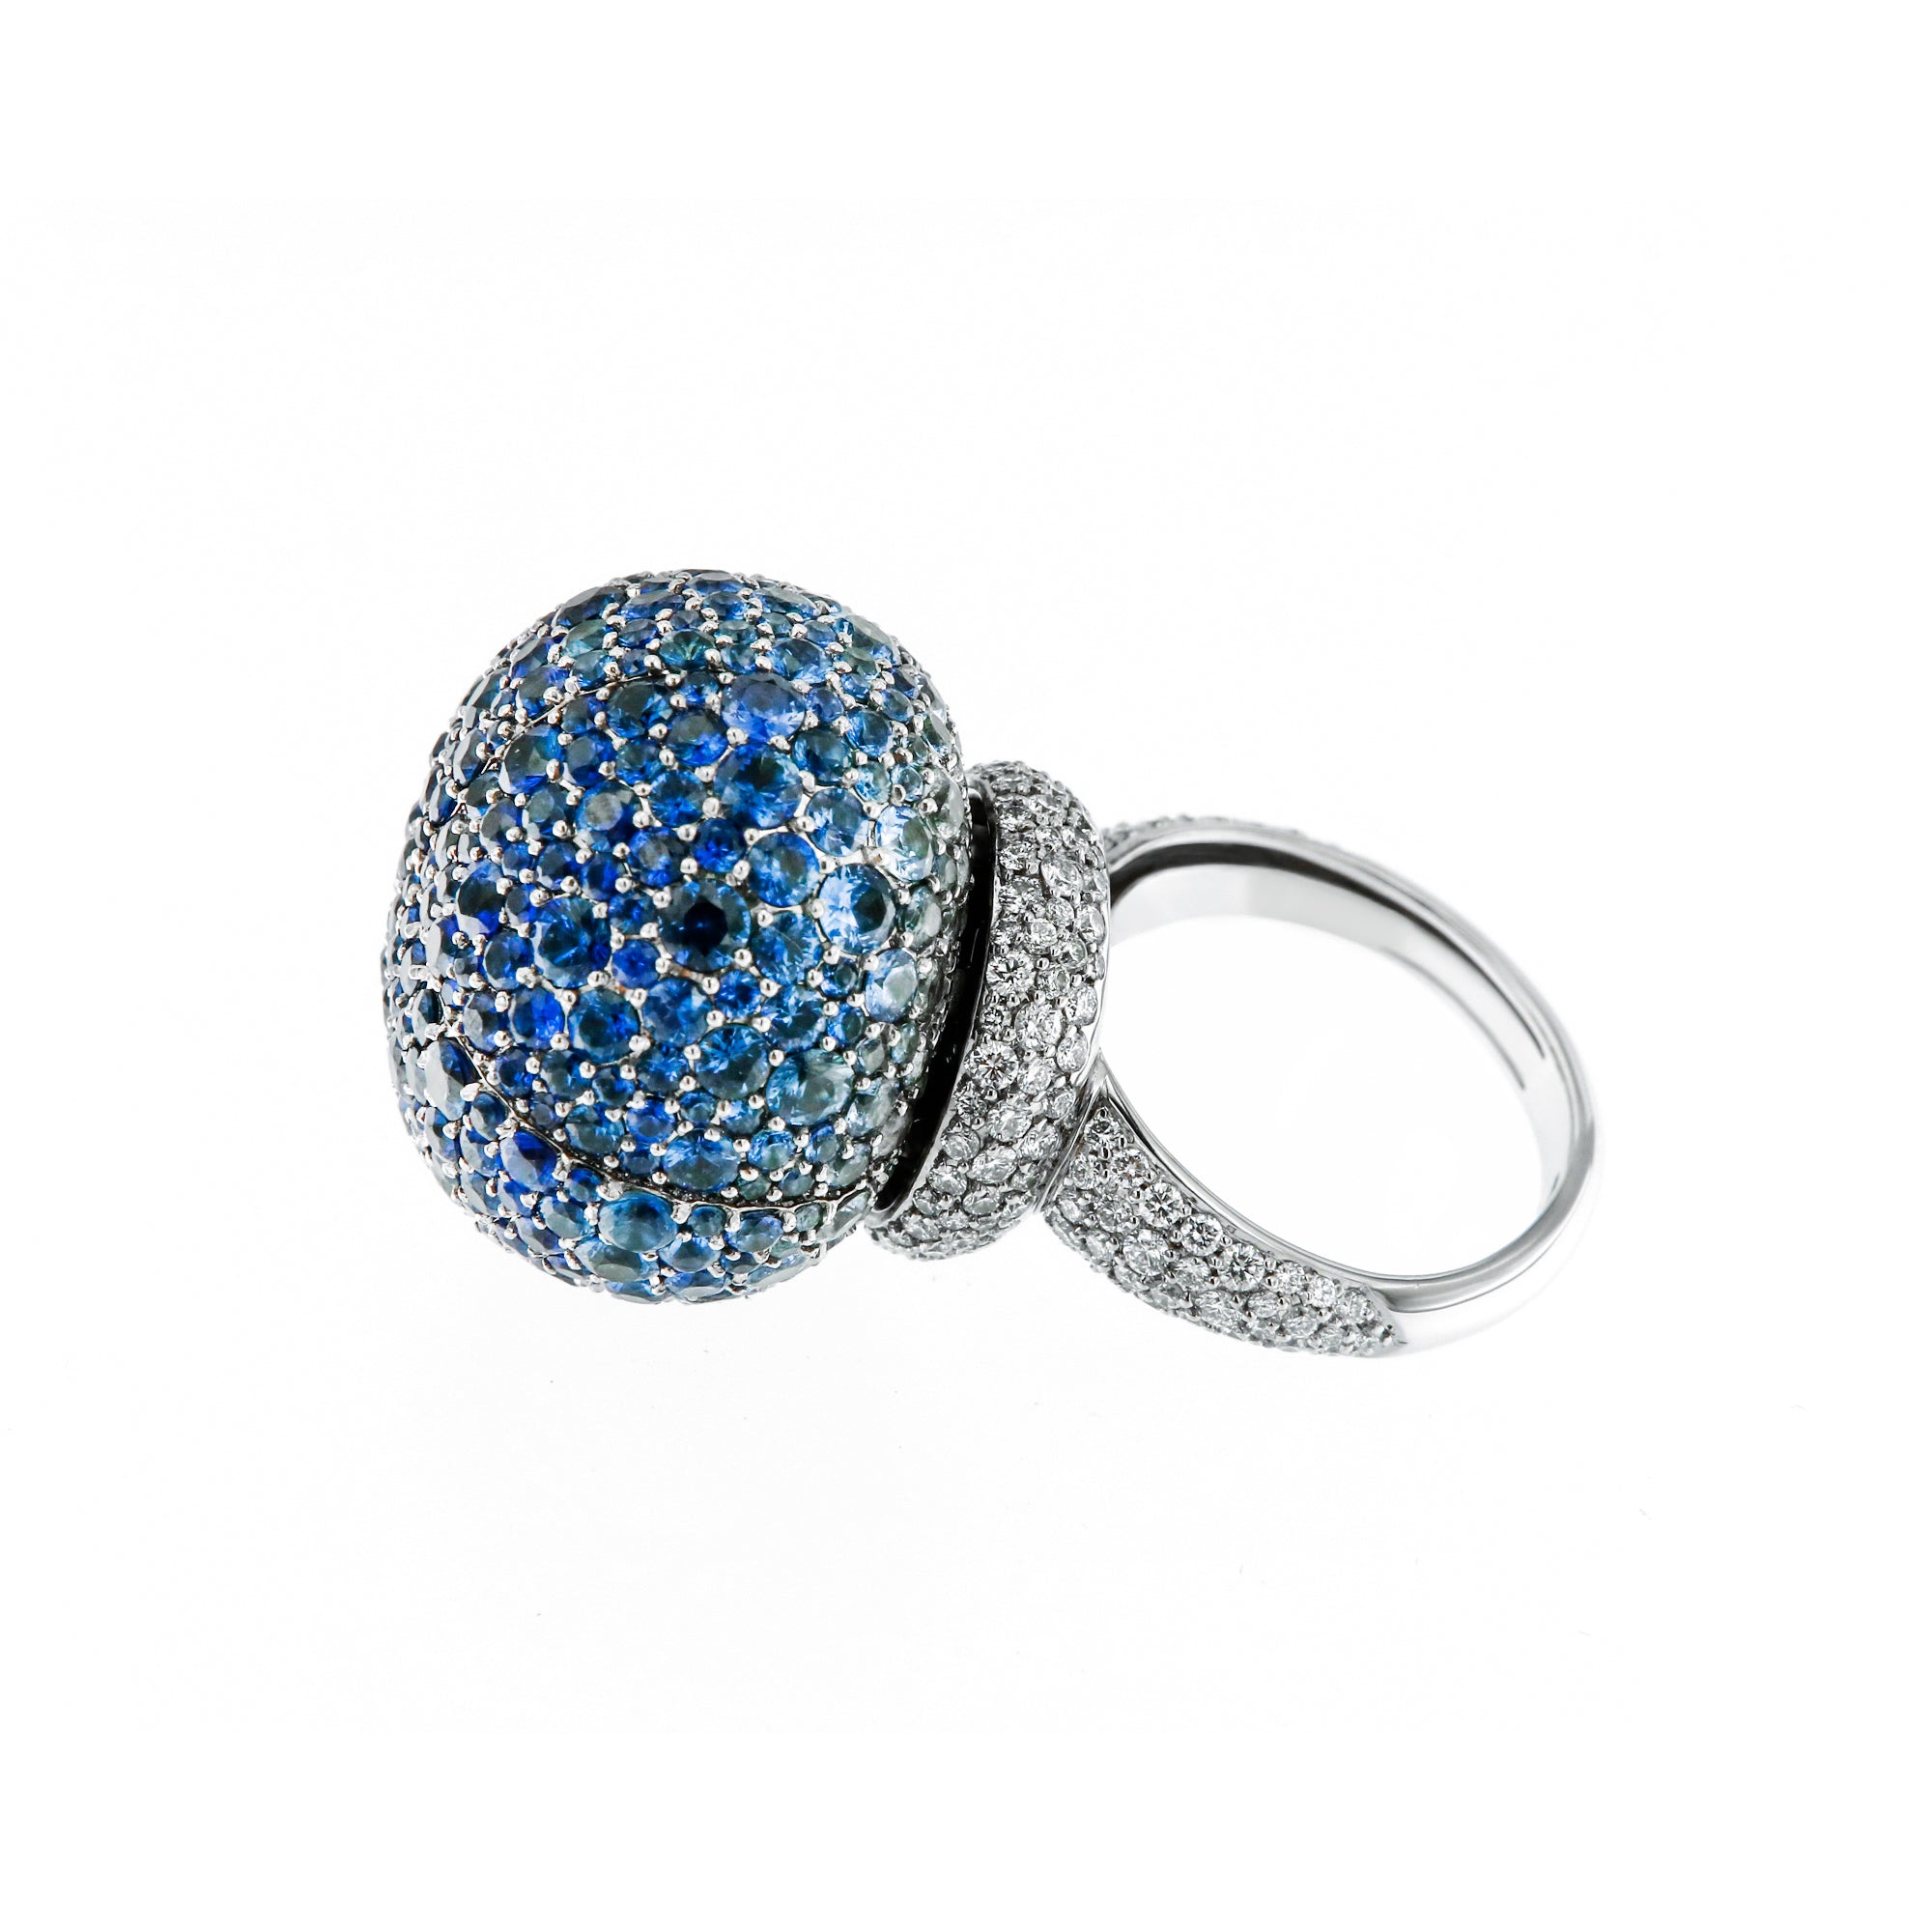 Ring "Blue Mangosteen"  White Gold with White Diamonds and Blue Sapphires